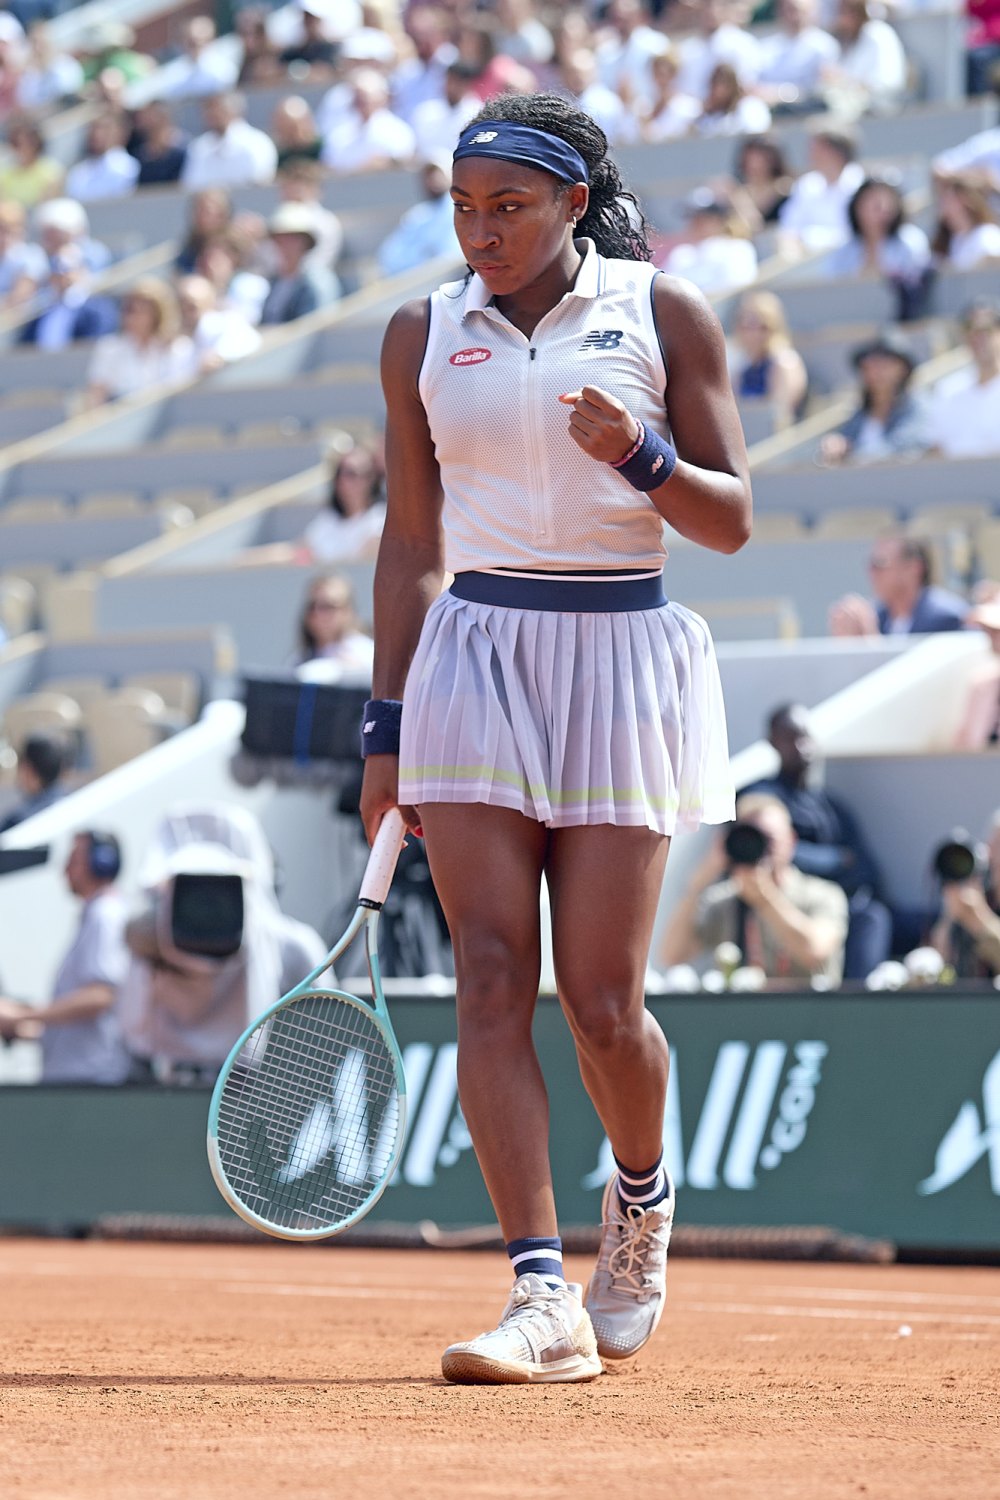 Coco Gauff Plans Tennis Outfits 2 Years in Advance